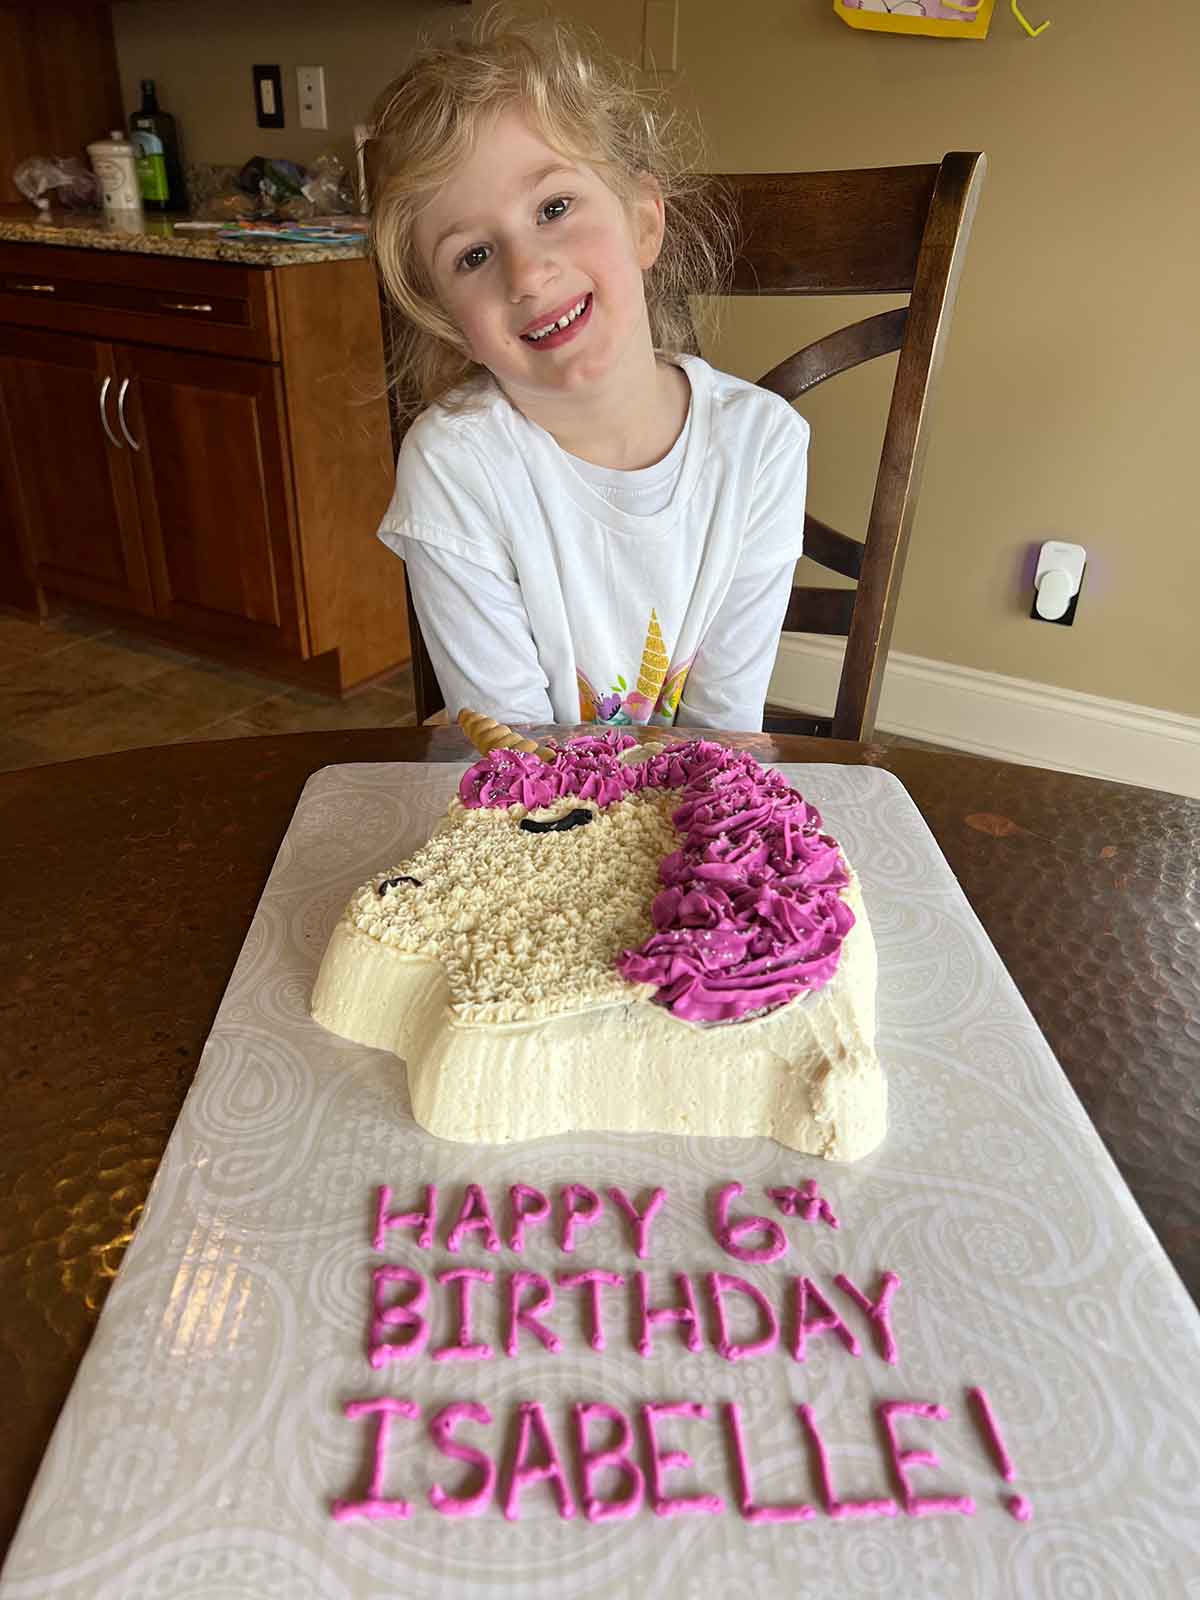 Little girl sitting in front of a unicorn-shaped cake that says "Happy 6th Birthday Isabelle!"